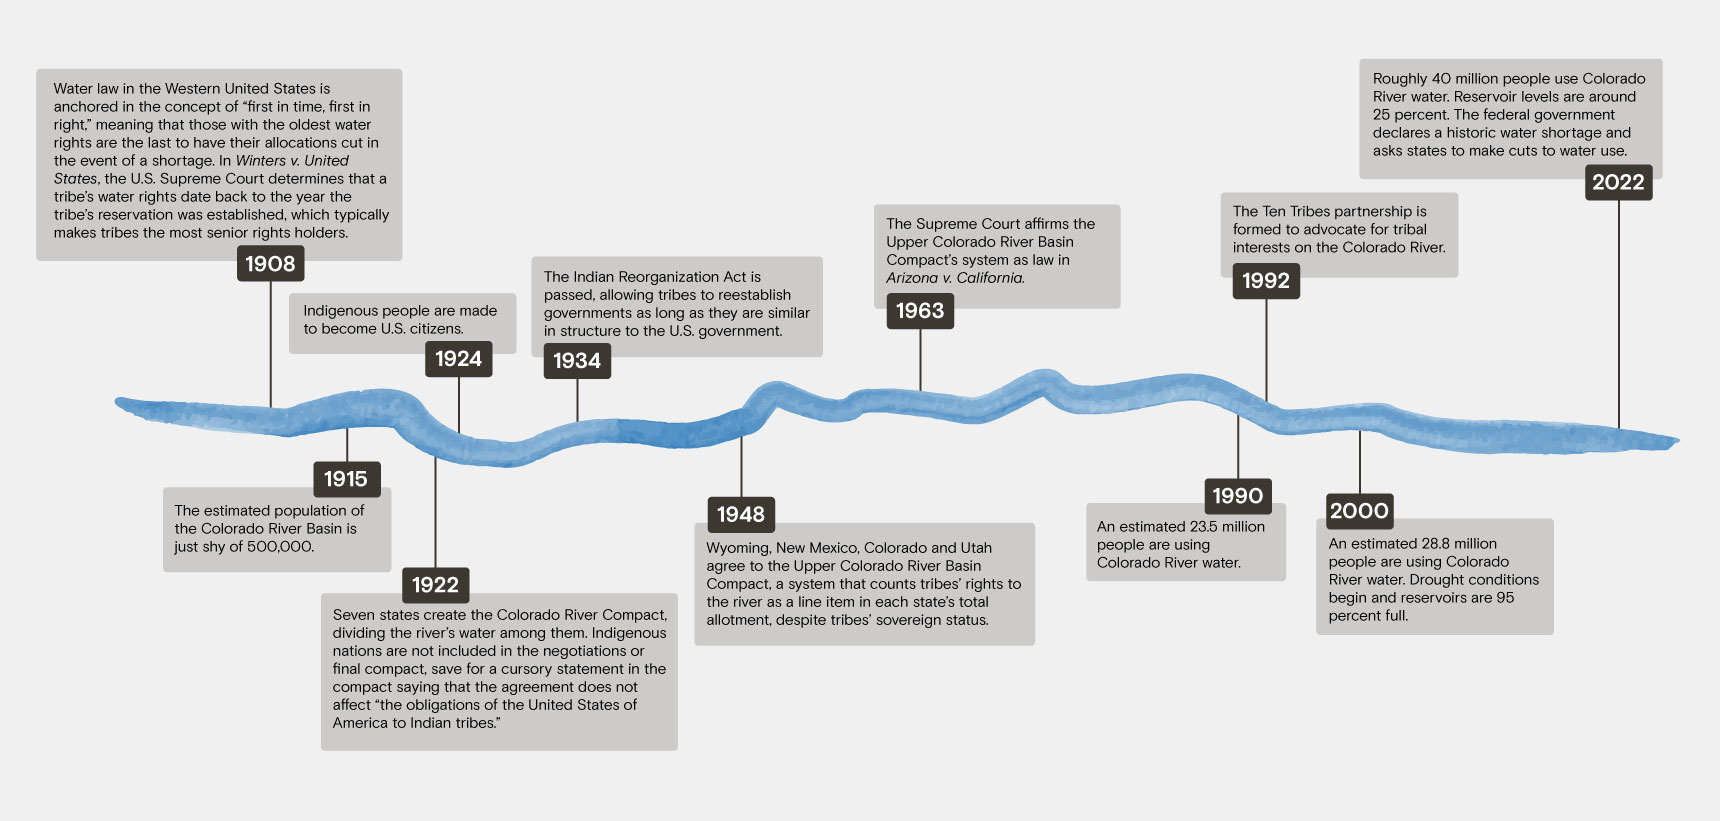 Timeline from 1908 to 2022 showing different historical events related to Indigenous water rights